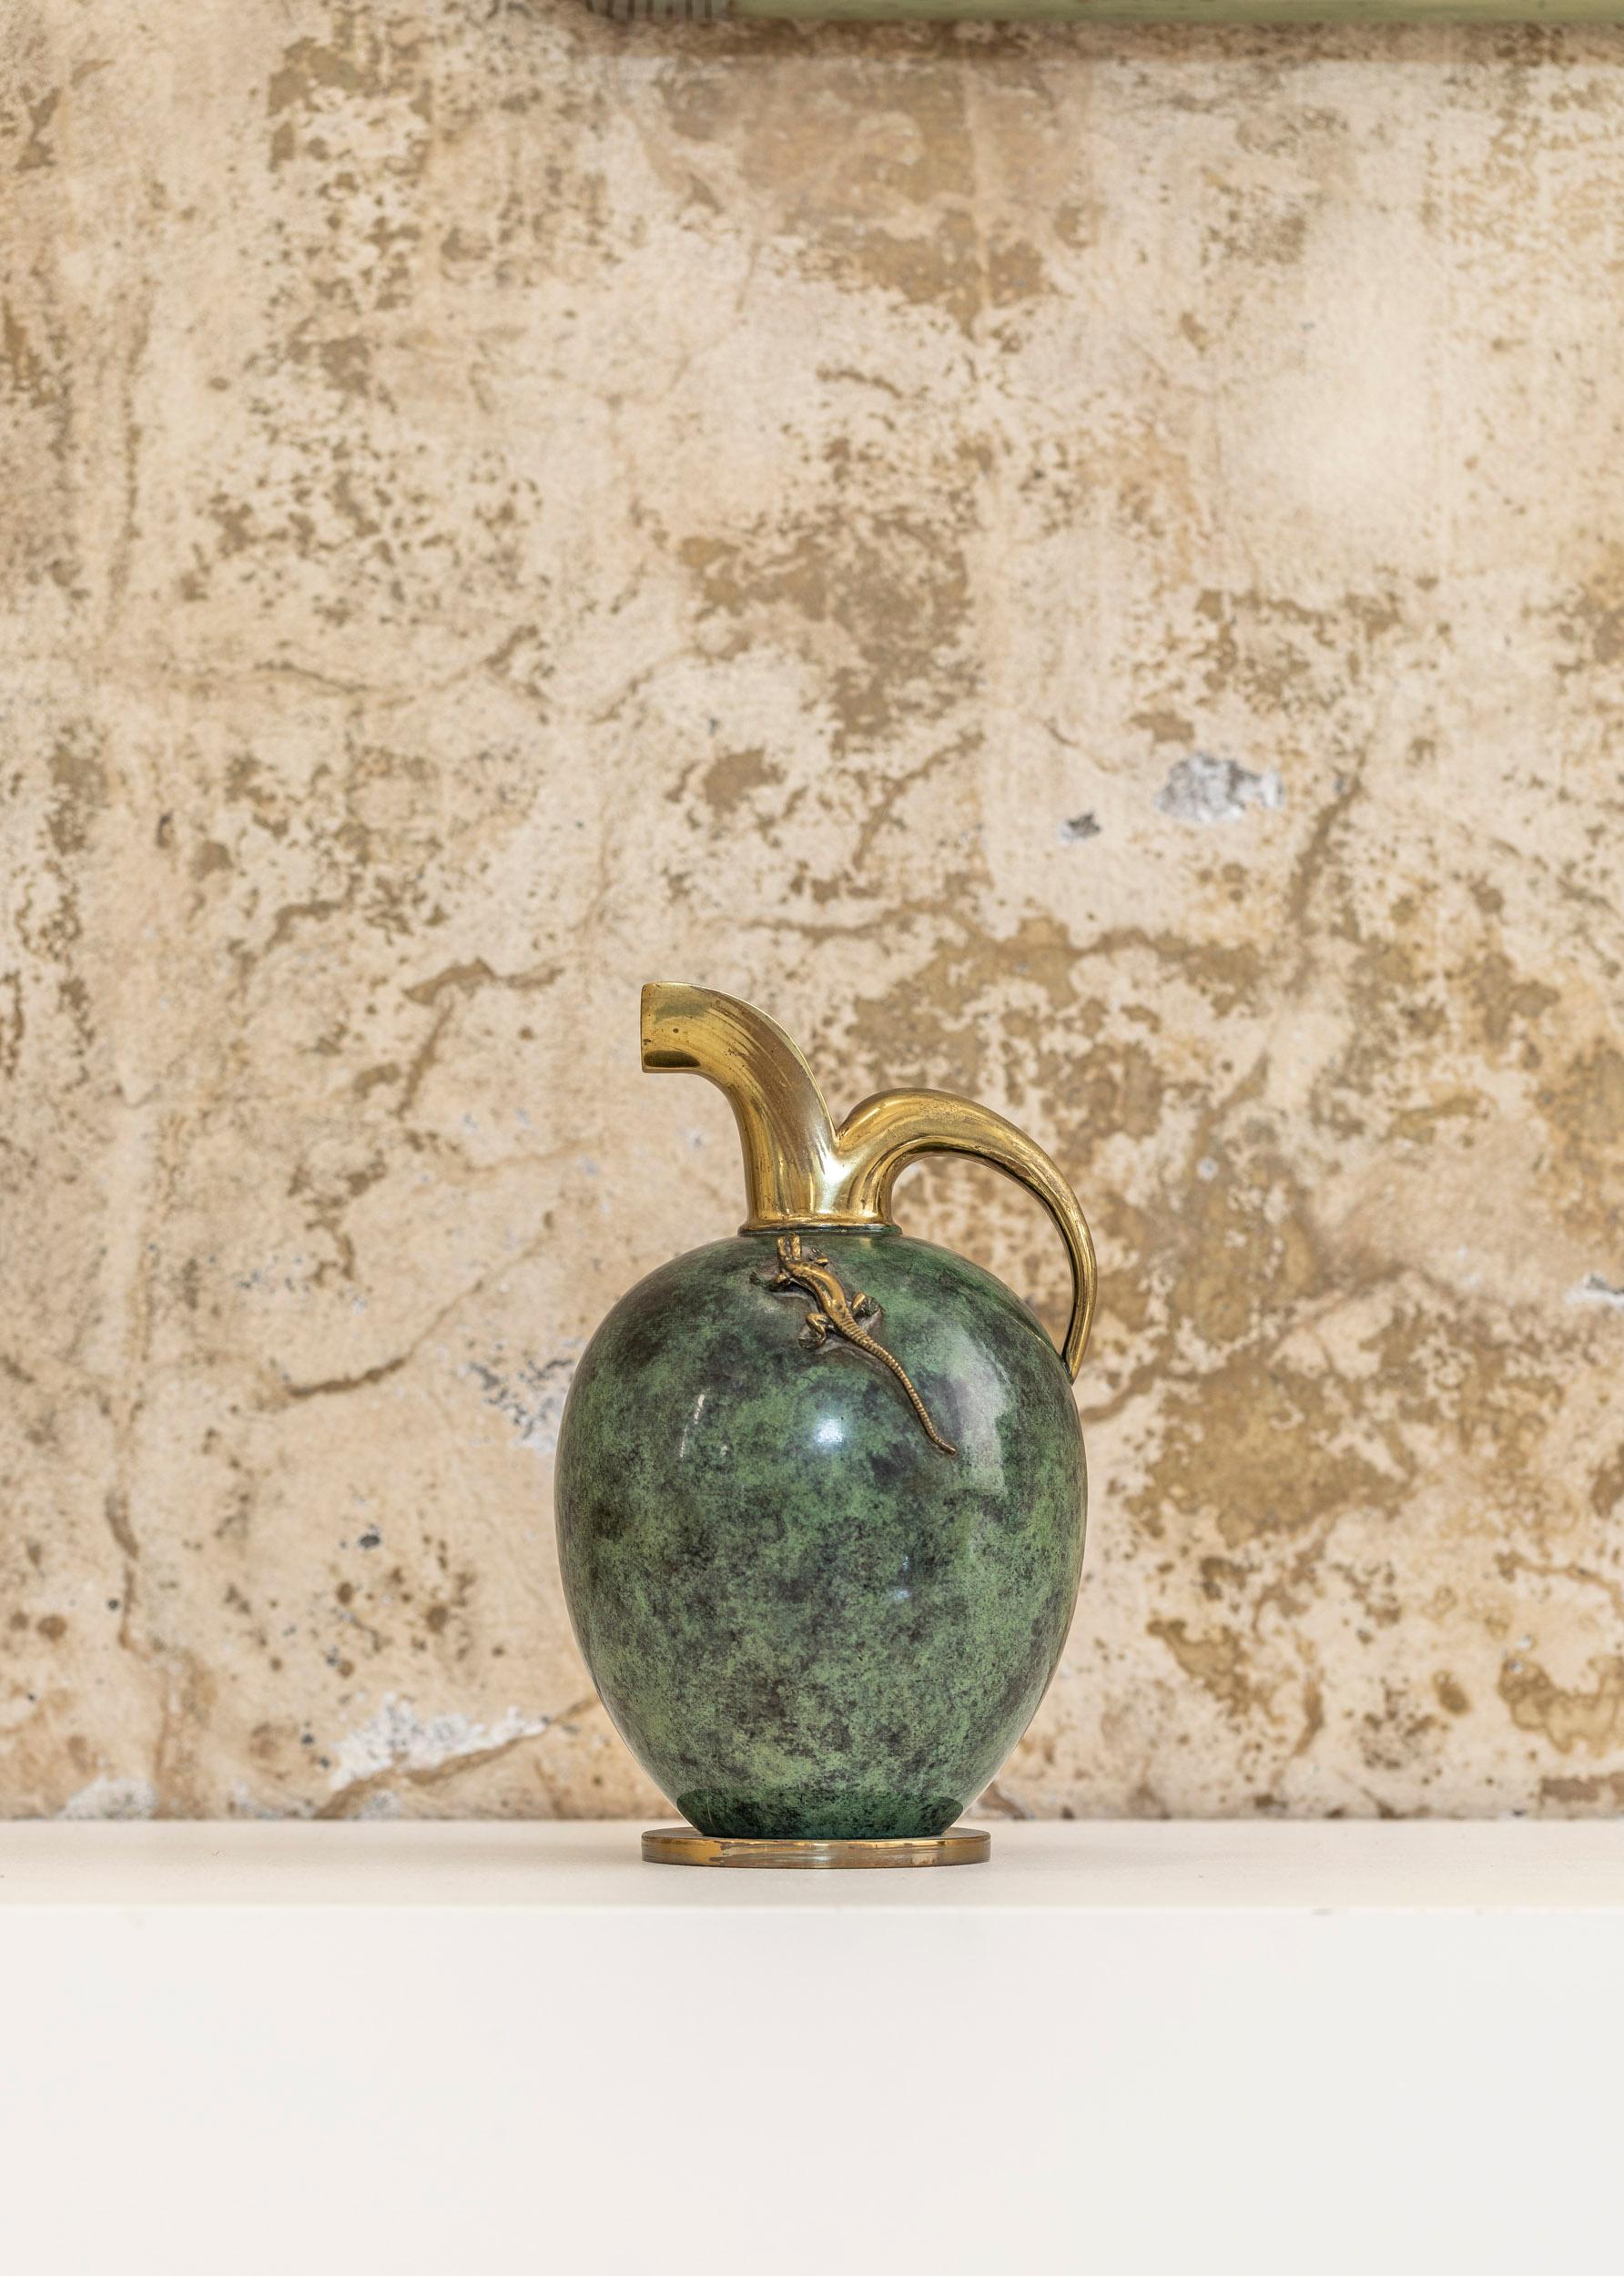 Stunning faux marbre brass pitcher with nice climbing in the style of Aldo Tura.